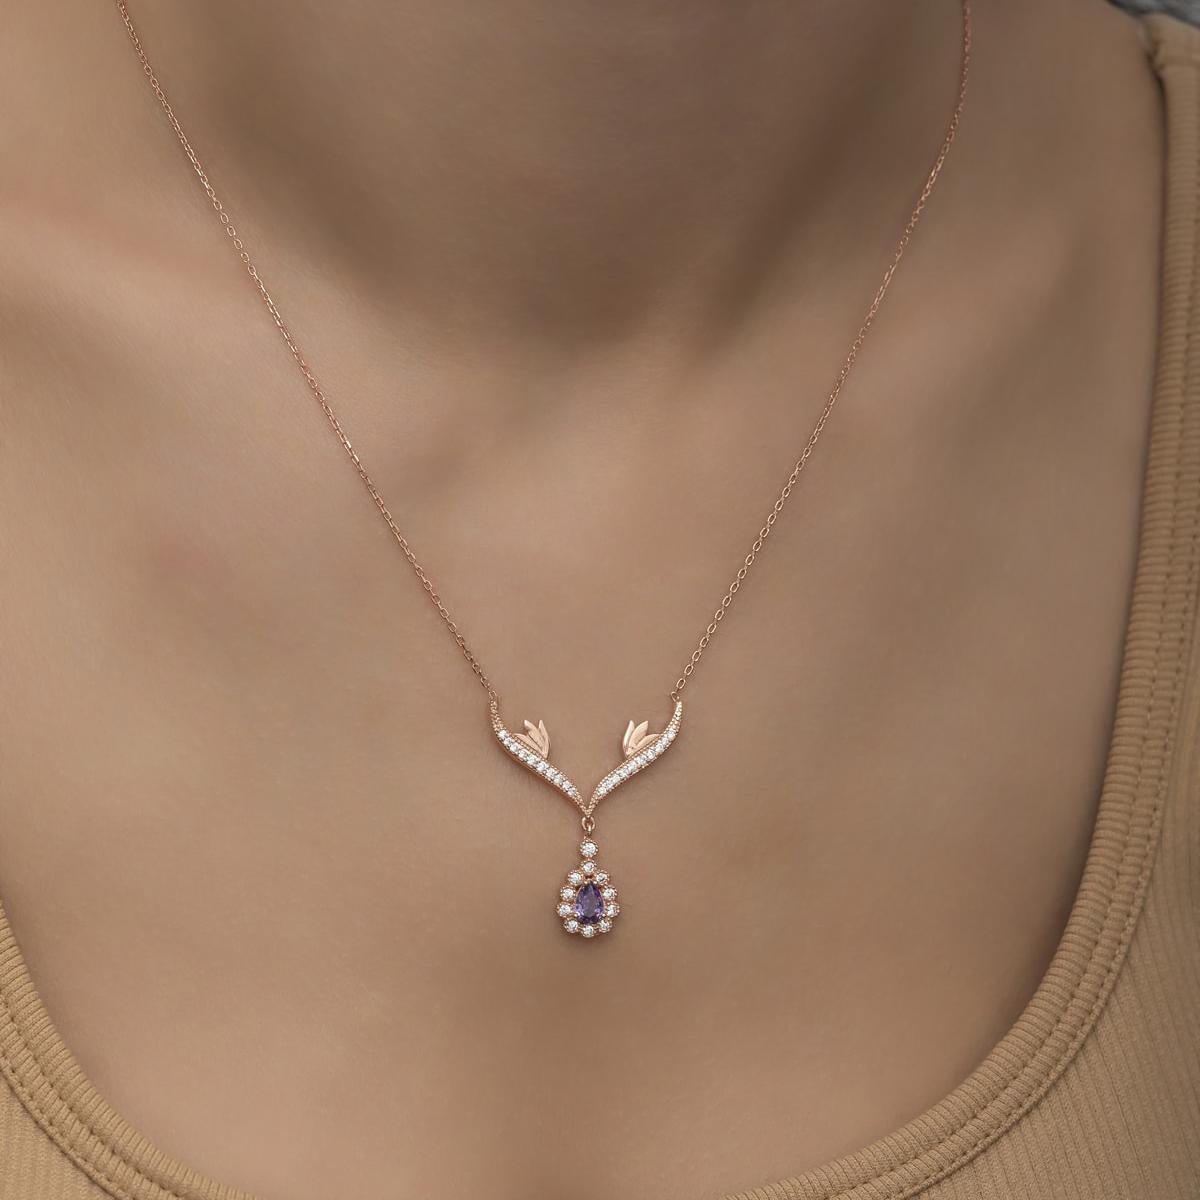 Amethyst Crystal Necklace • Amethyst Birthstone Necklaces - Trending Silver Gifts